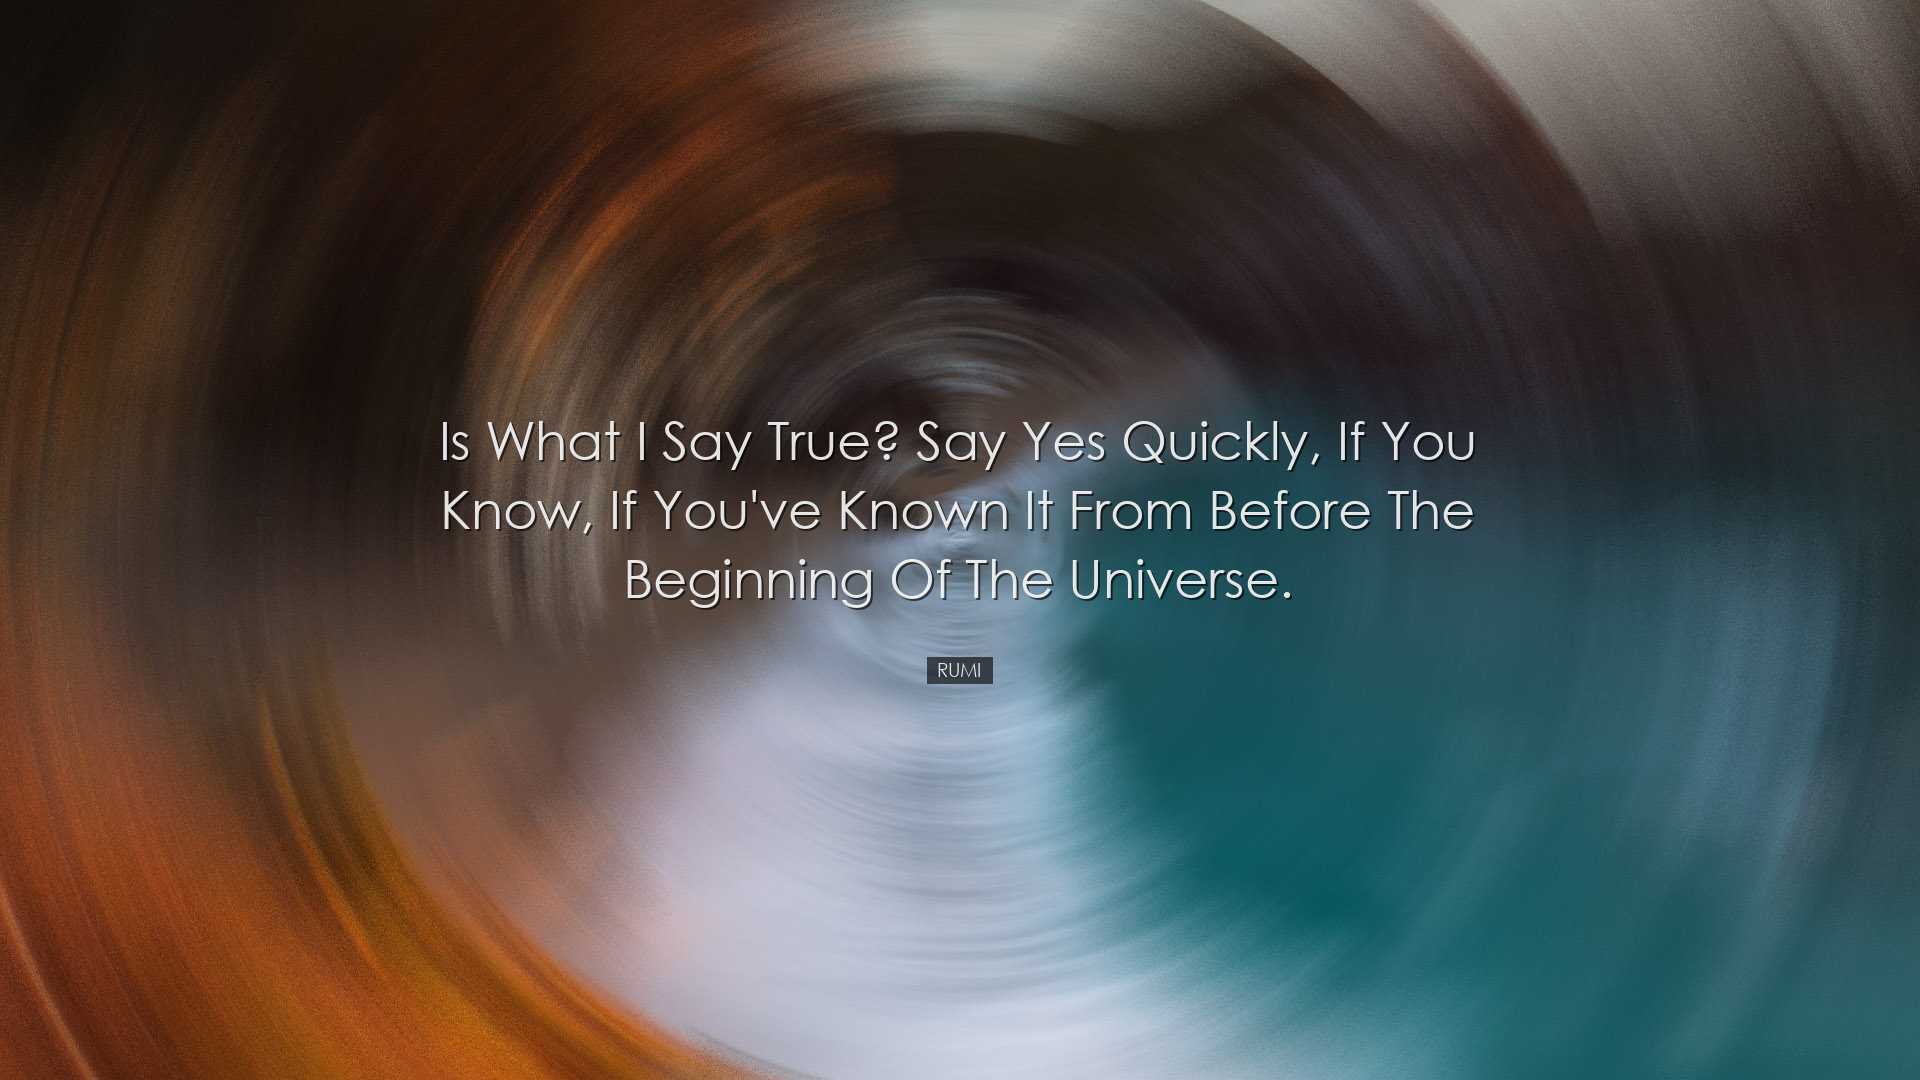 Is what I say true? Say yes quickly, if you know, if you've known